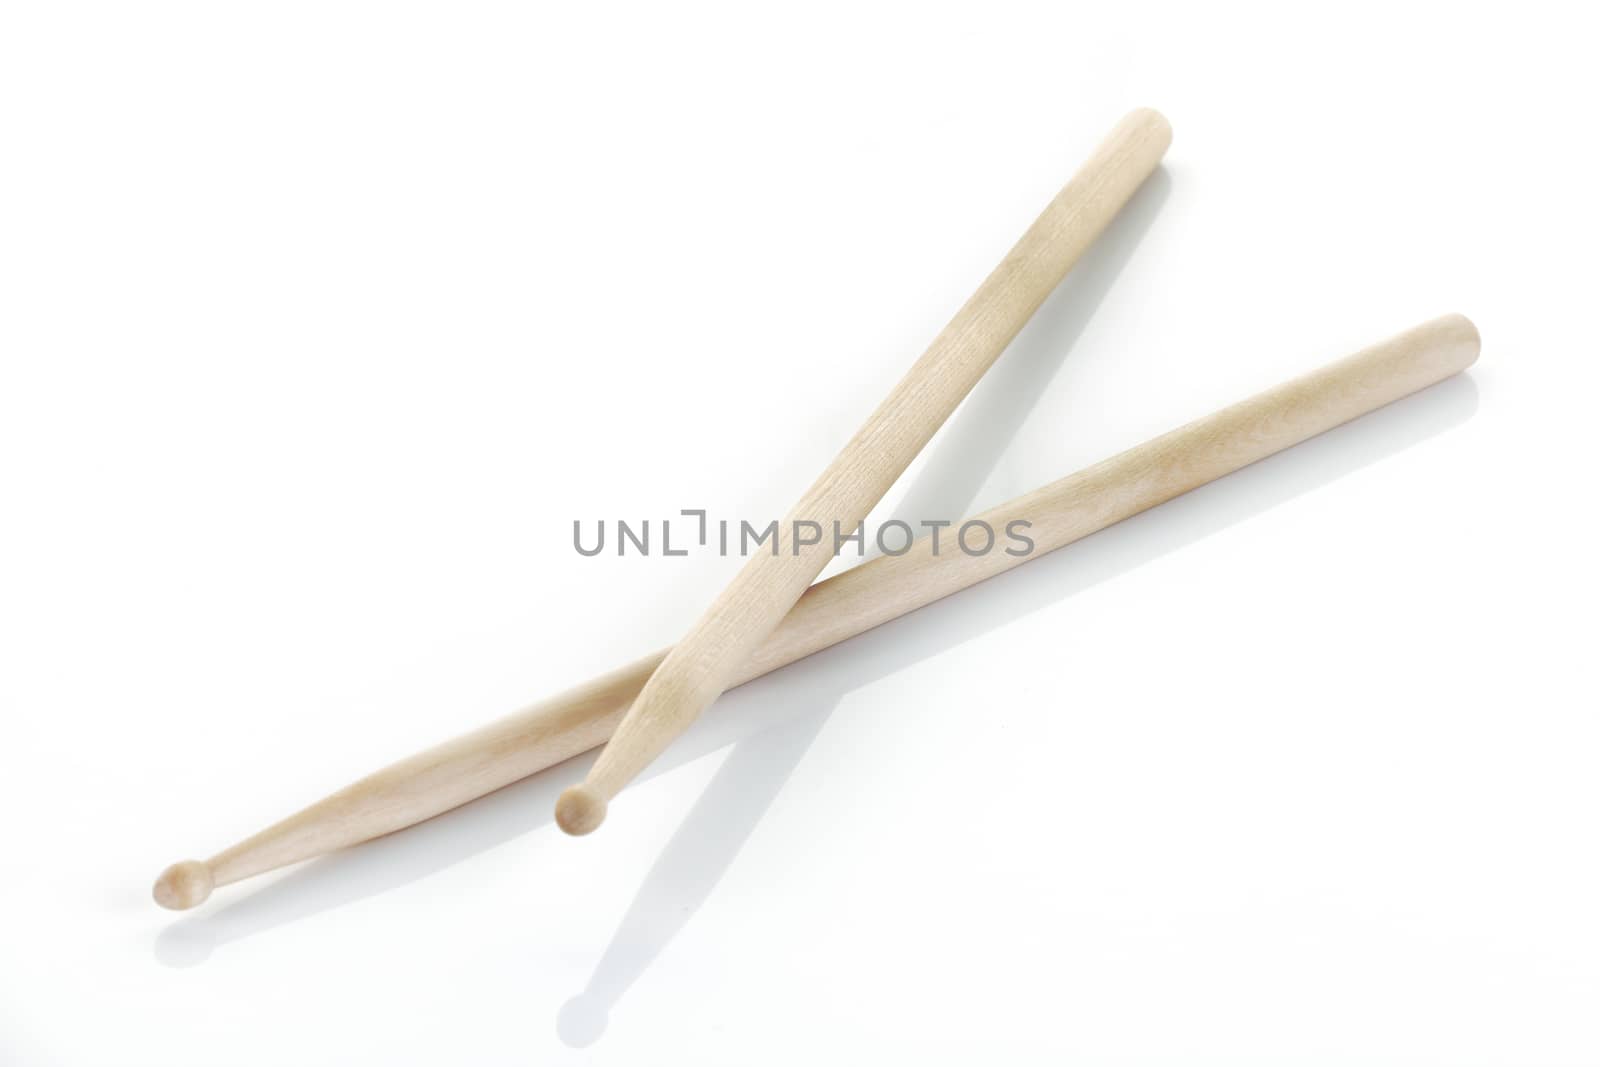 A pair of drumsticks on white surface with shadow